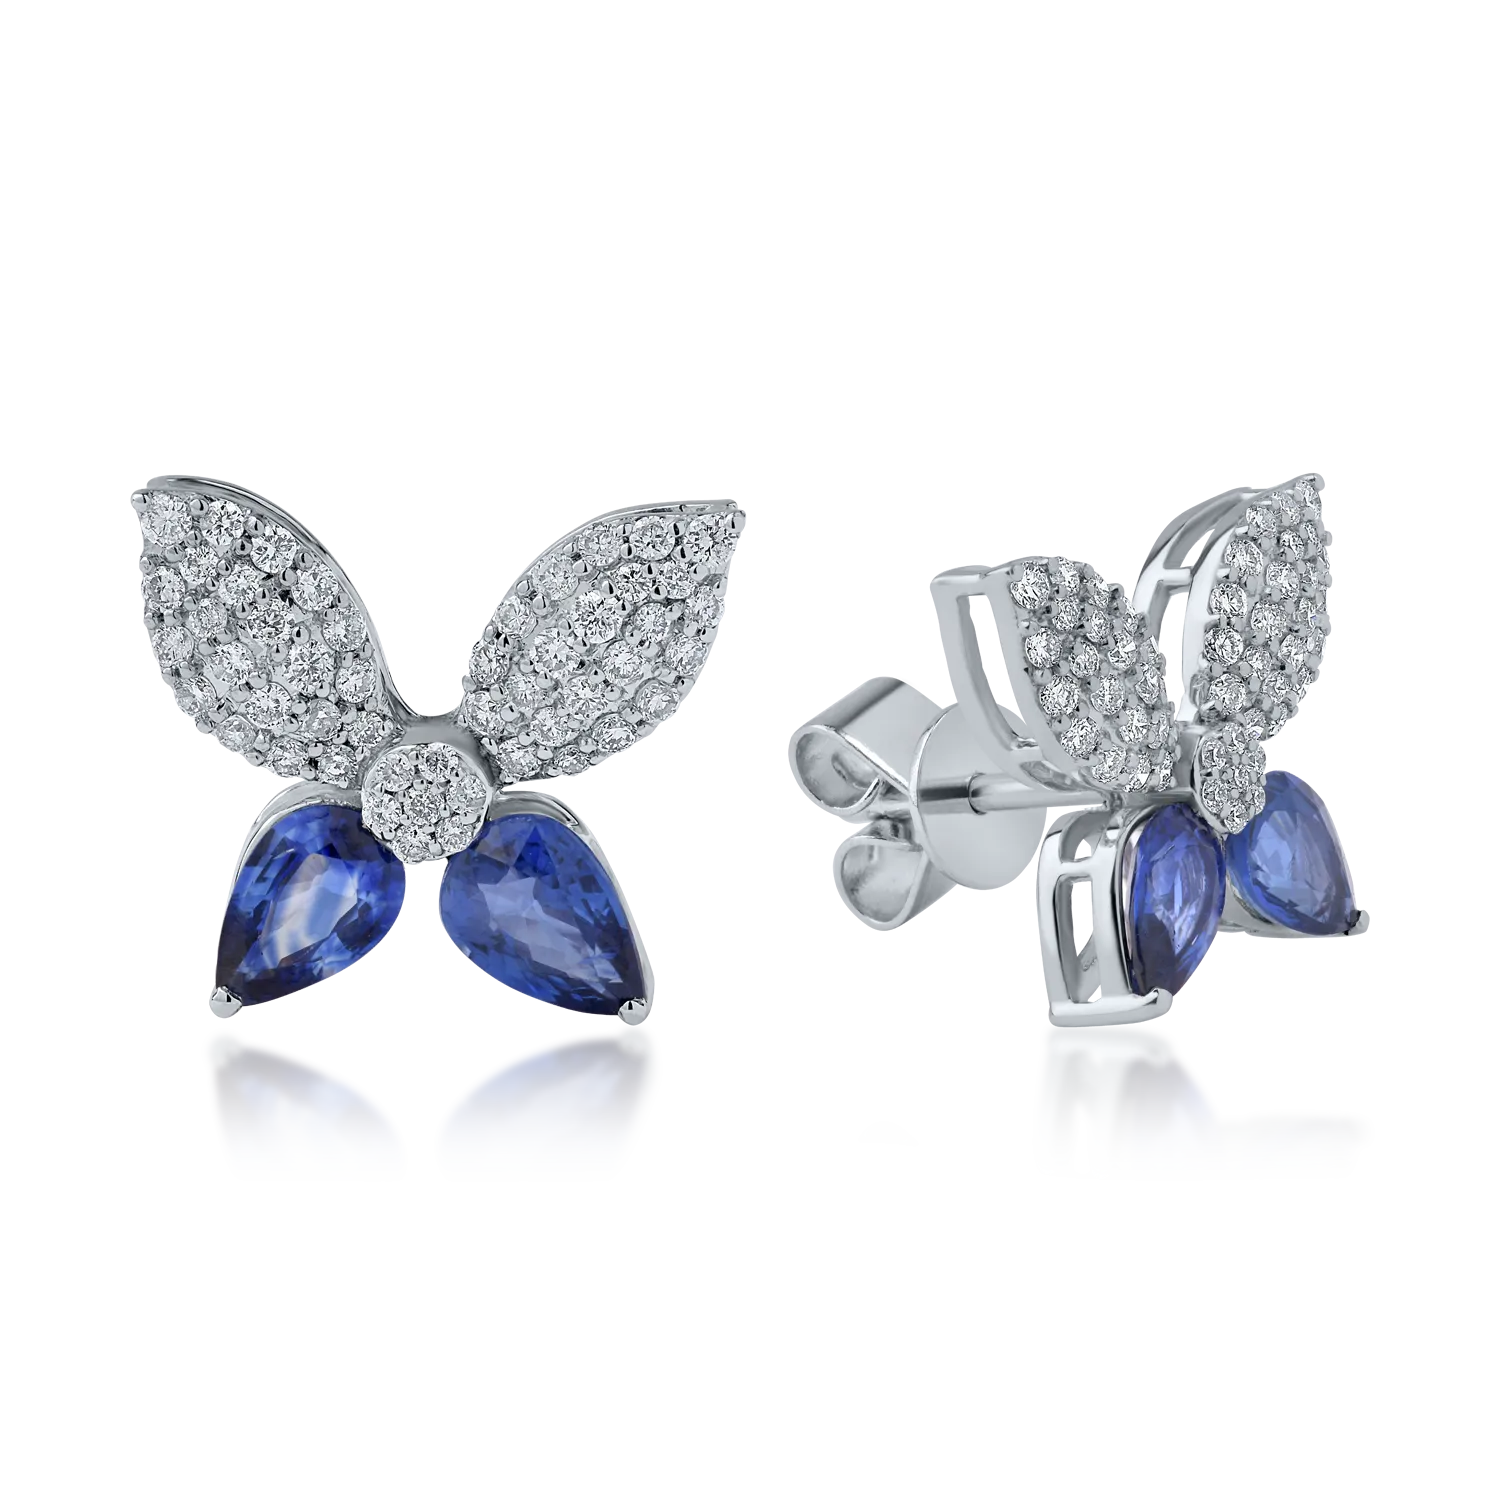 White gold flower earrings with 1.86ct heated sapphires and 0.6ct diamonds